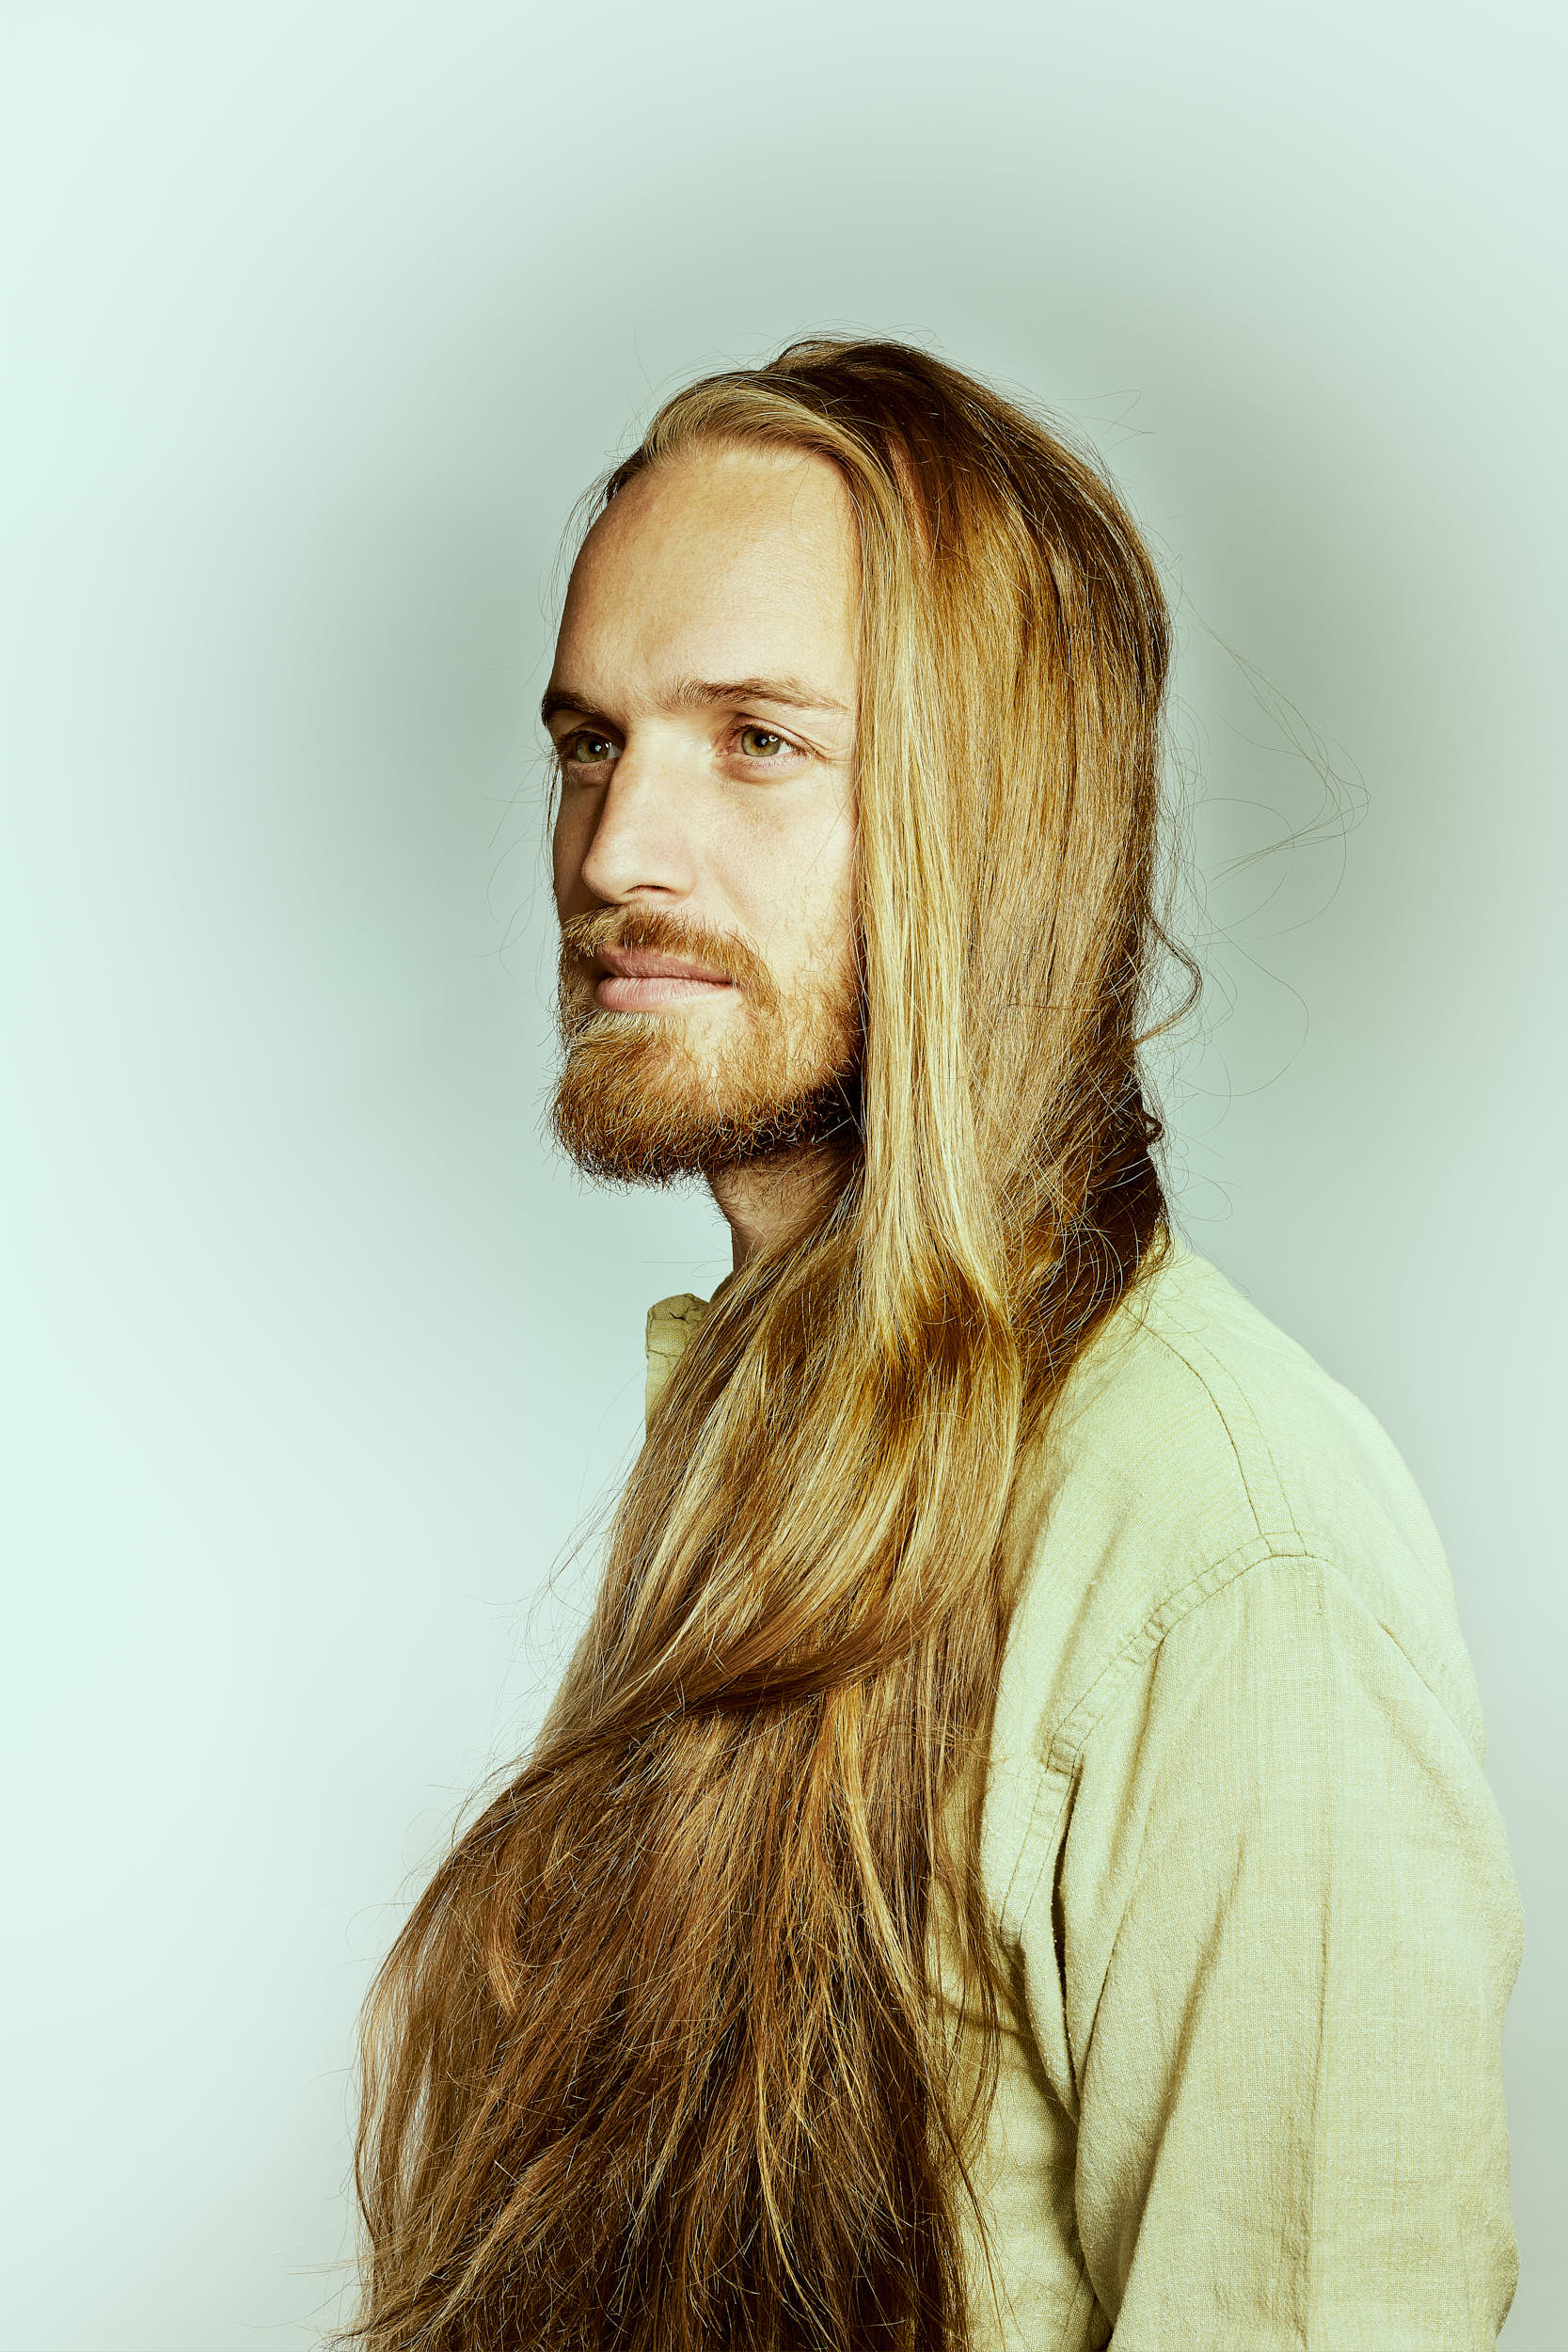 Classic portrait photography: Man with long hair in a studio setting.